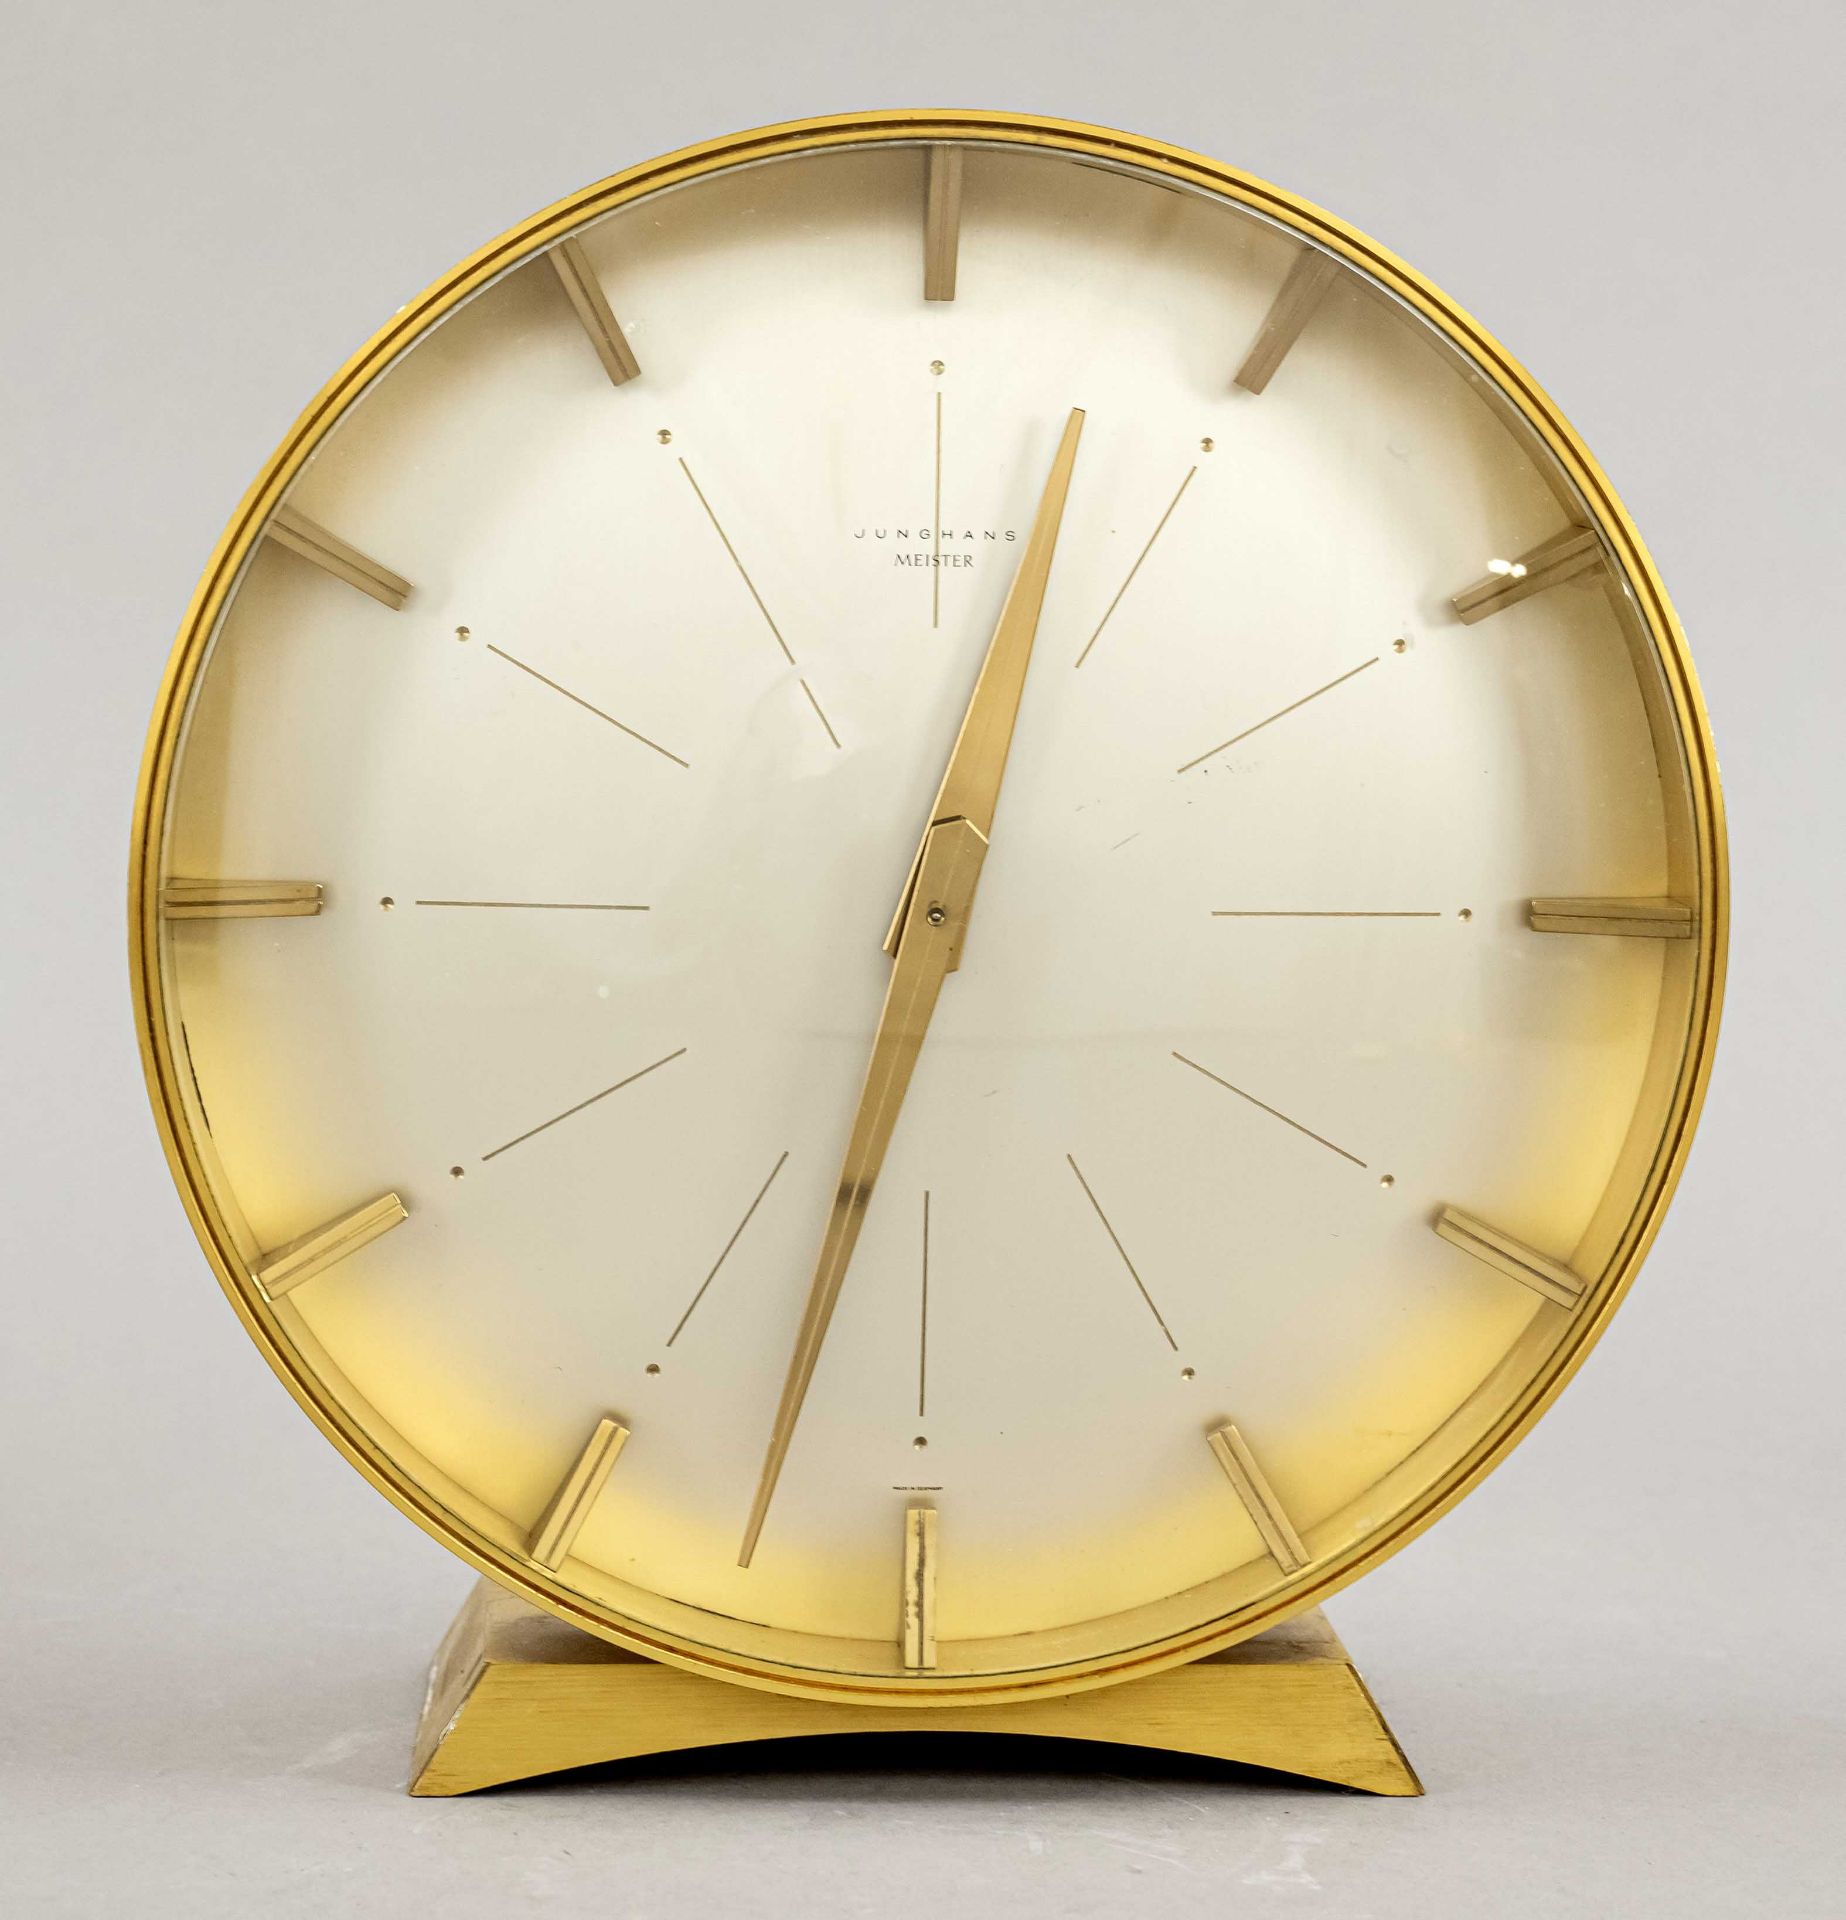 Table clock - Junghans Meister, around 1980, solid brass, domed glass, movement with 1/2 hour